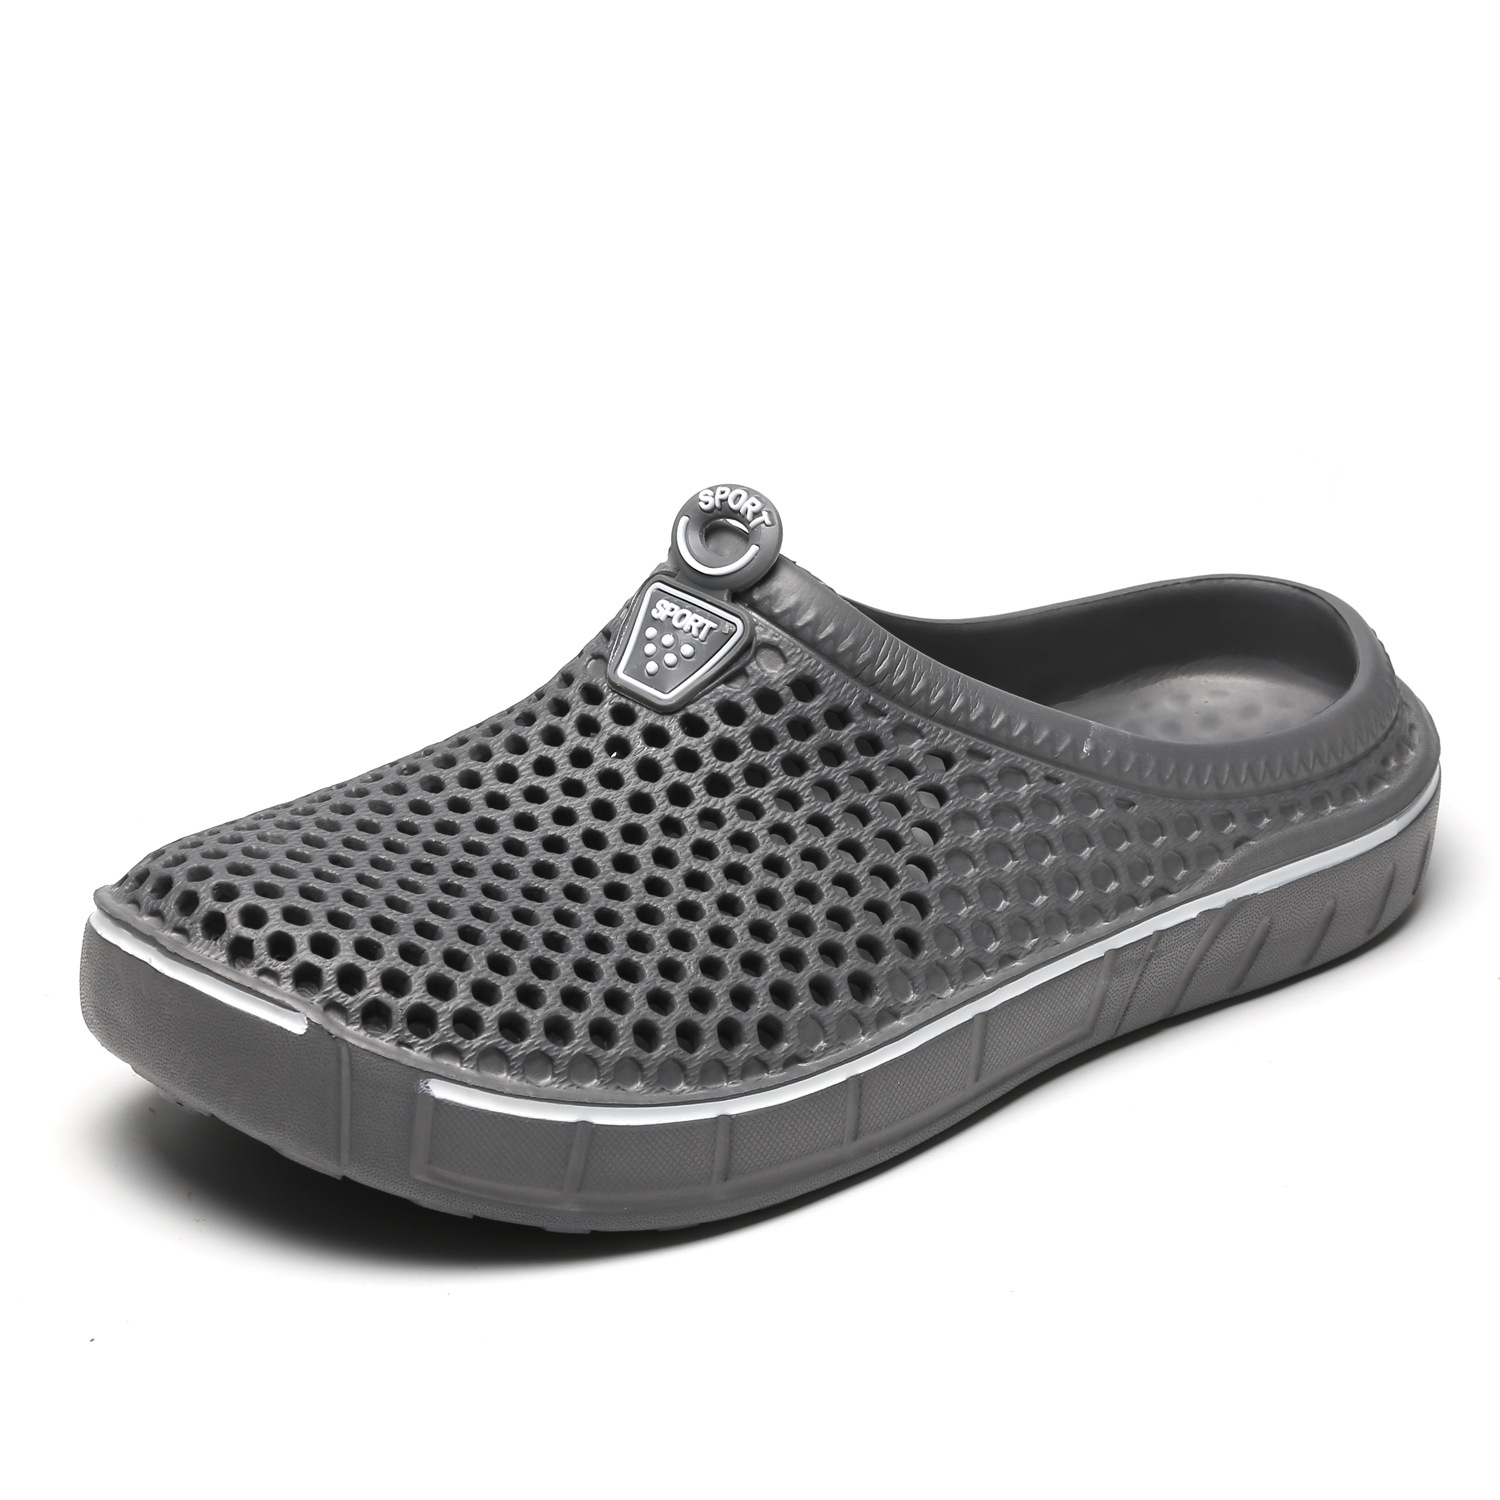 Mens Beach Breathable Upstream Chic Slippers Sandals